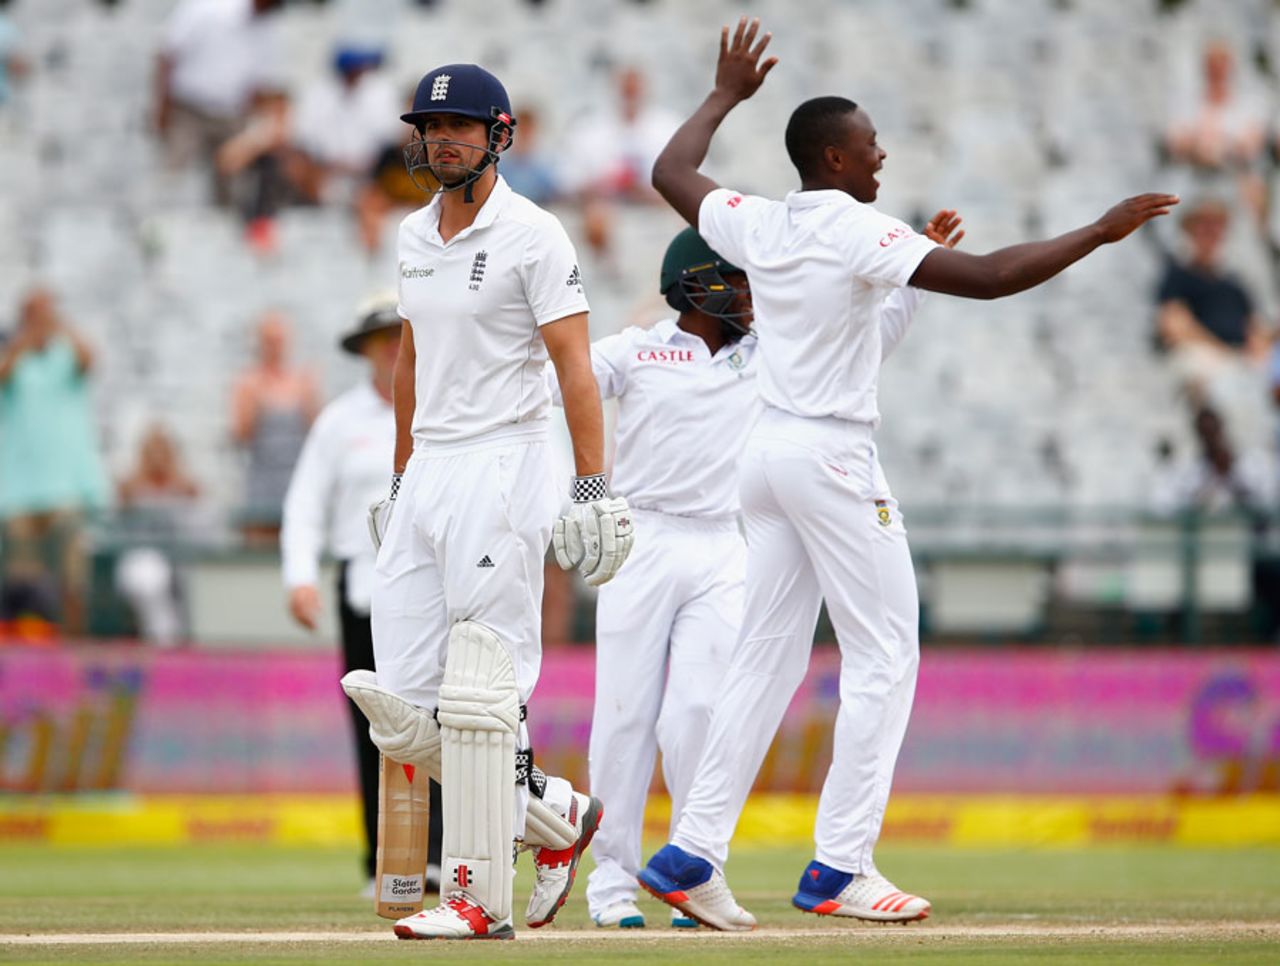 Kagiso Rabada got Alastair Cook in the second over of the morning, South Africa v England, 2nd Test, Cape Town, 5th day, January 6, 2016